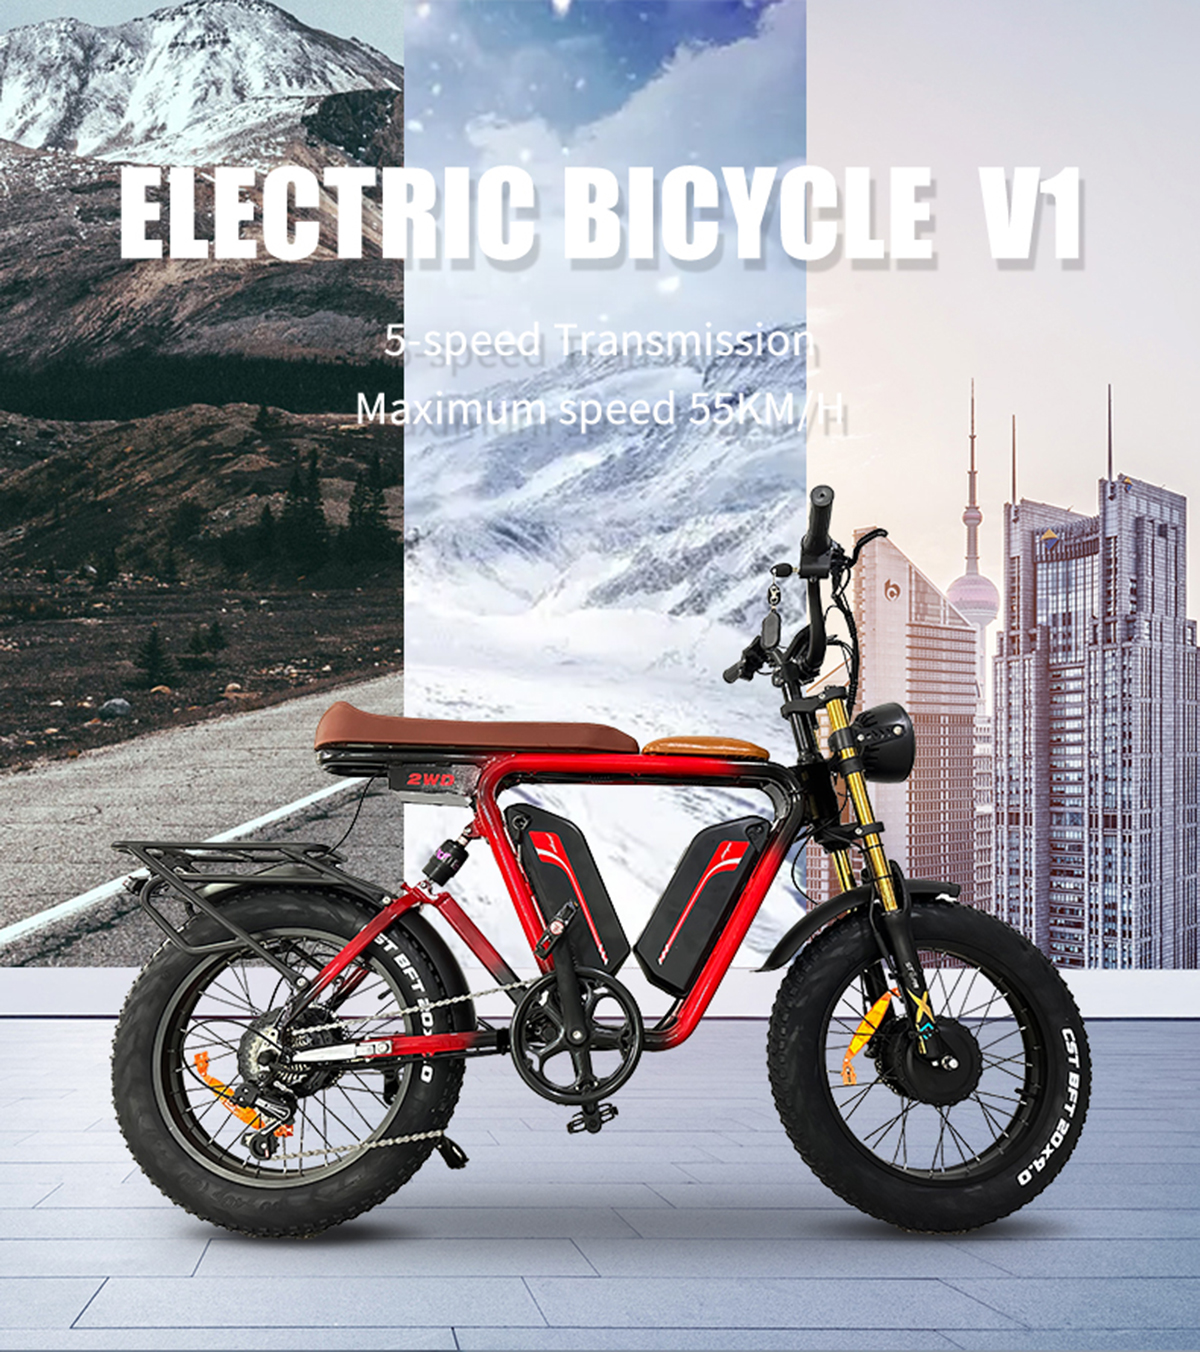 80-90kmPure Electric Cruising Range 55kmh With 5 Speed ​​Electric Bike Details 1